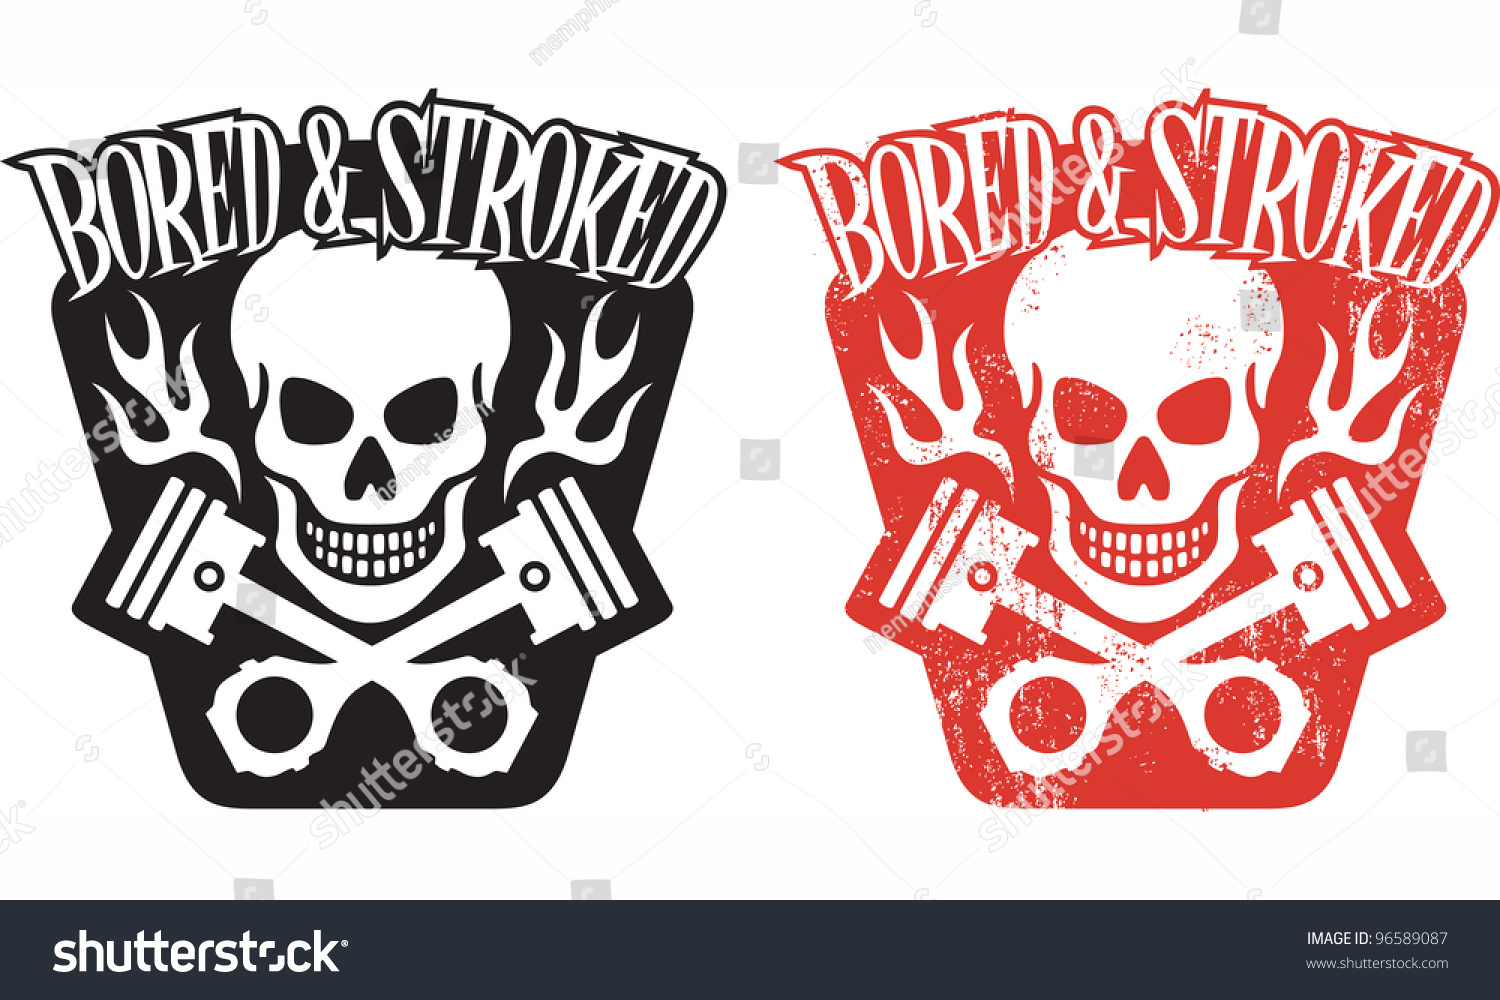 SVG of Vector illustration of skull and crossed pistons with flames and the phrase “Bored and Stroked”. Includes clean and grunge versions. Easy to edit colors and shapes. svg